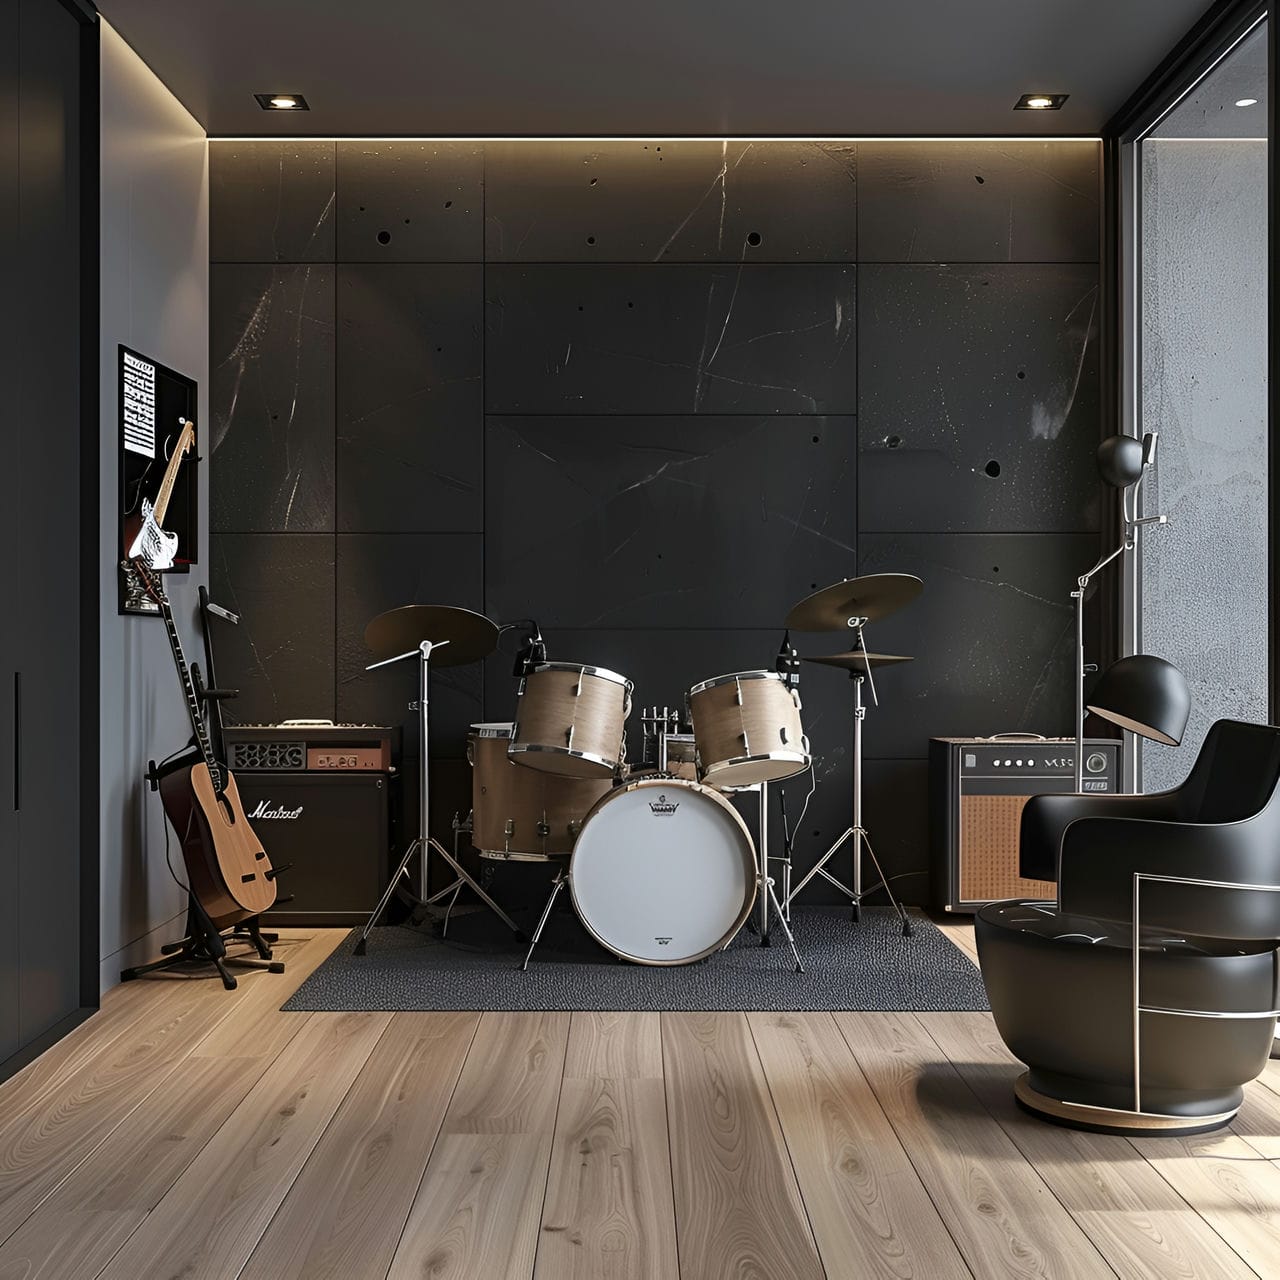 Music room: size, functionality, uses, furniture and renovation